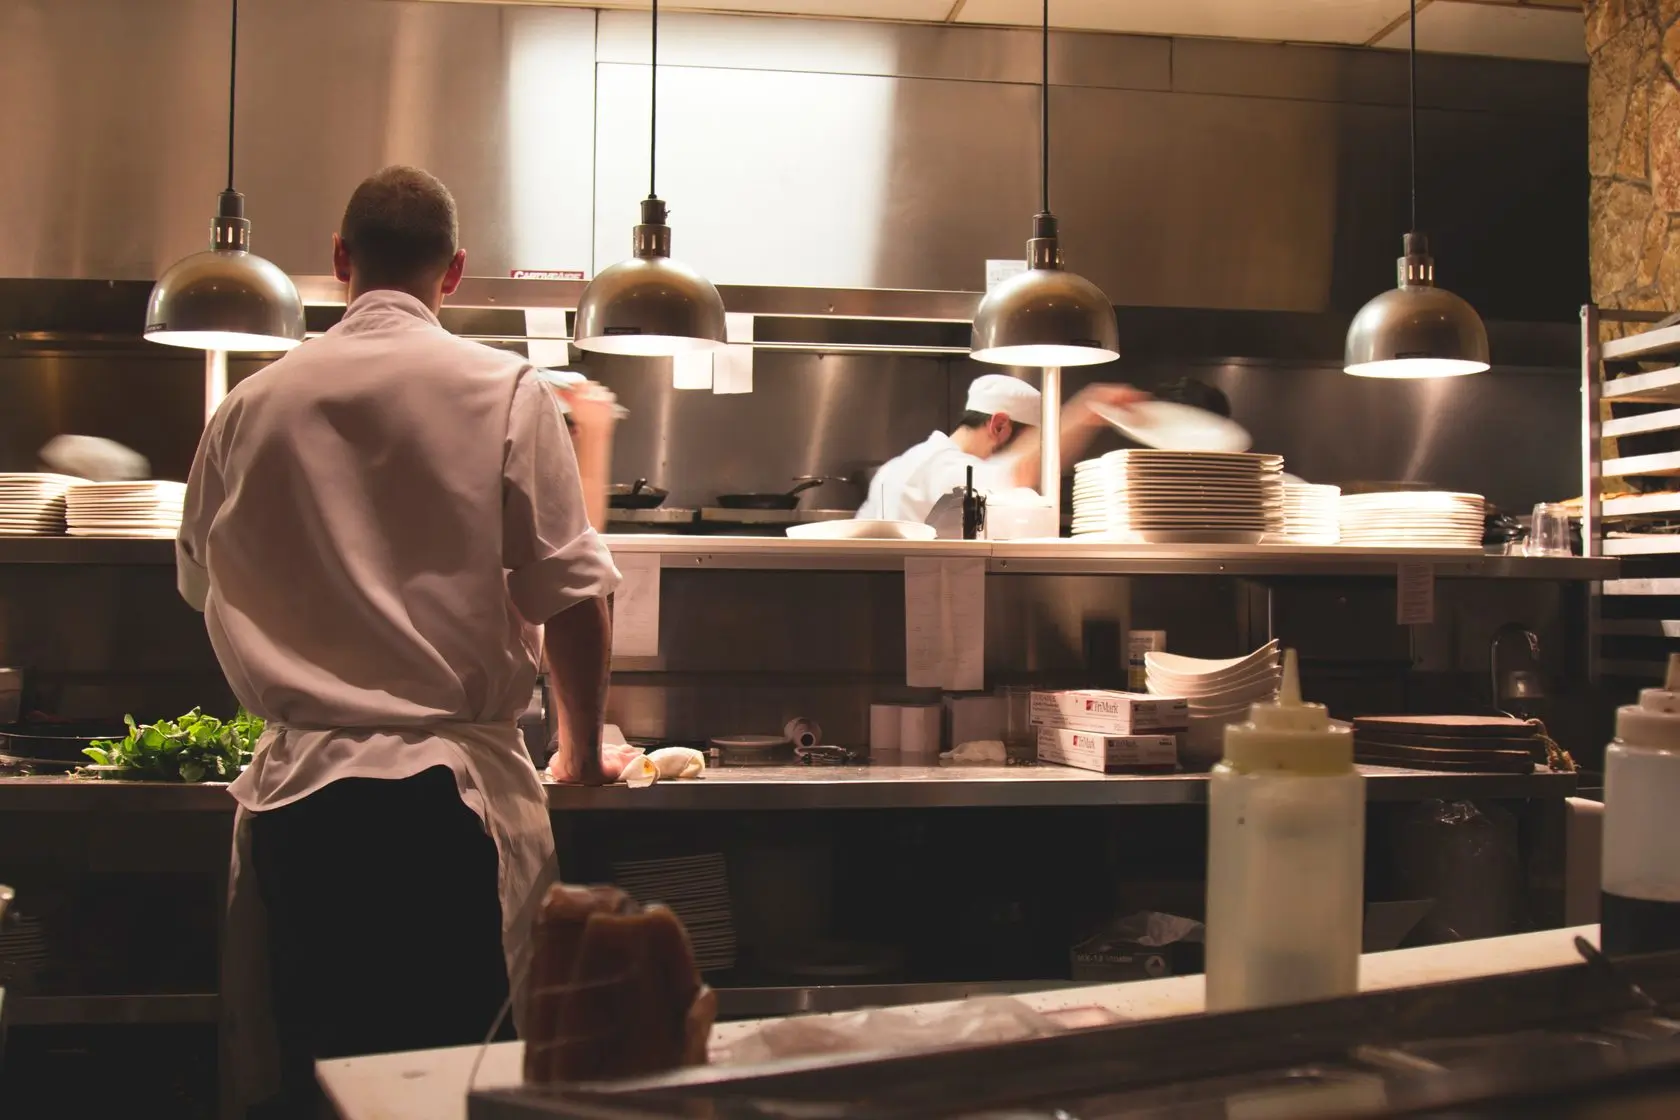 Two chefs work in a commercial kitchen.